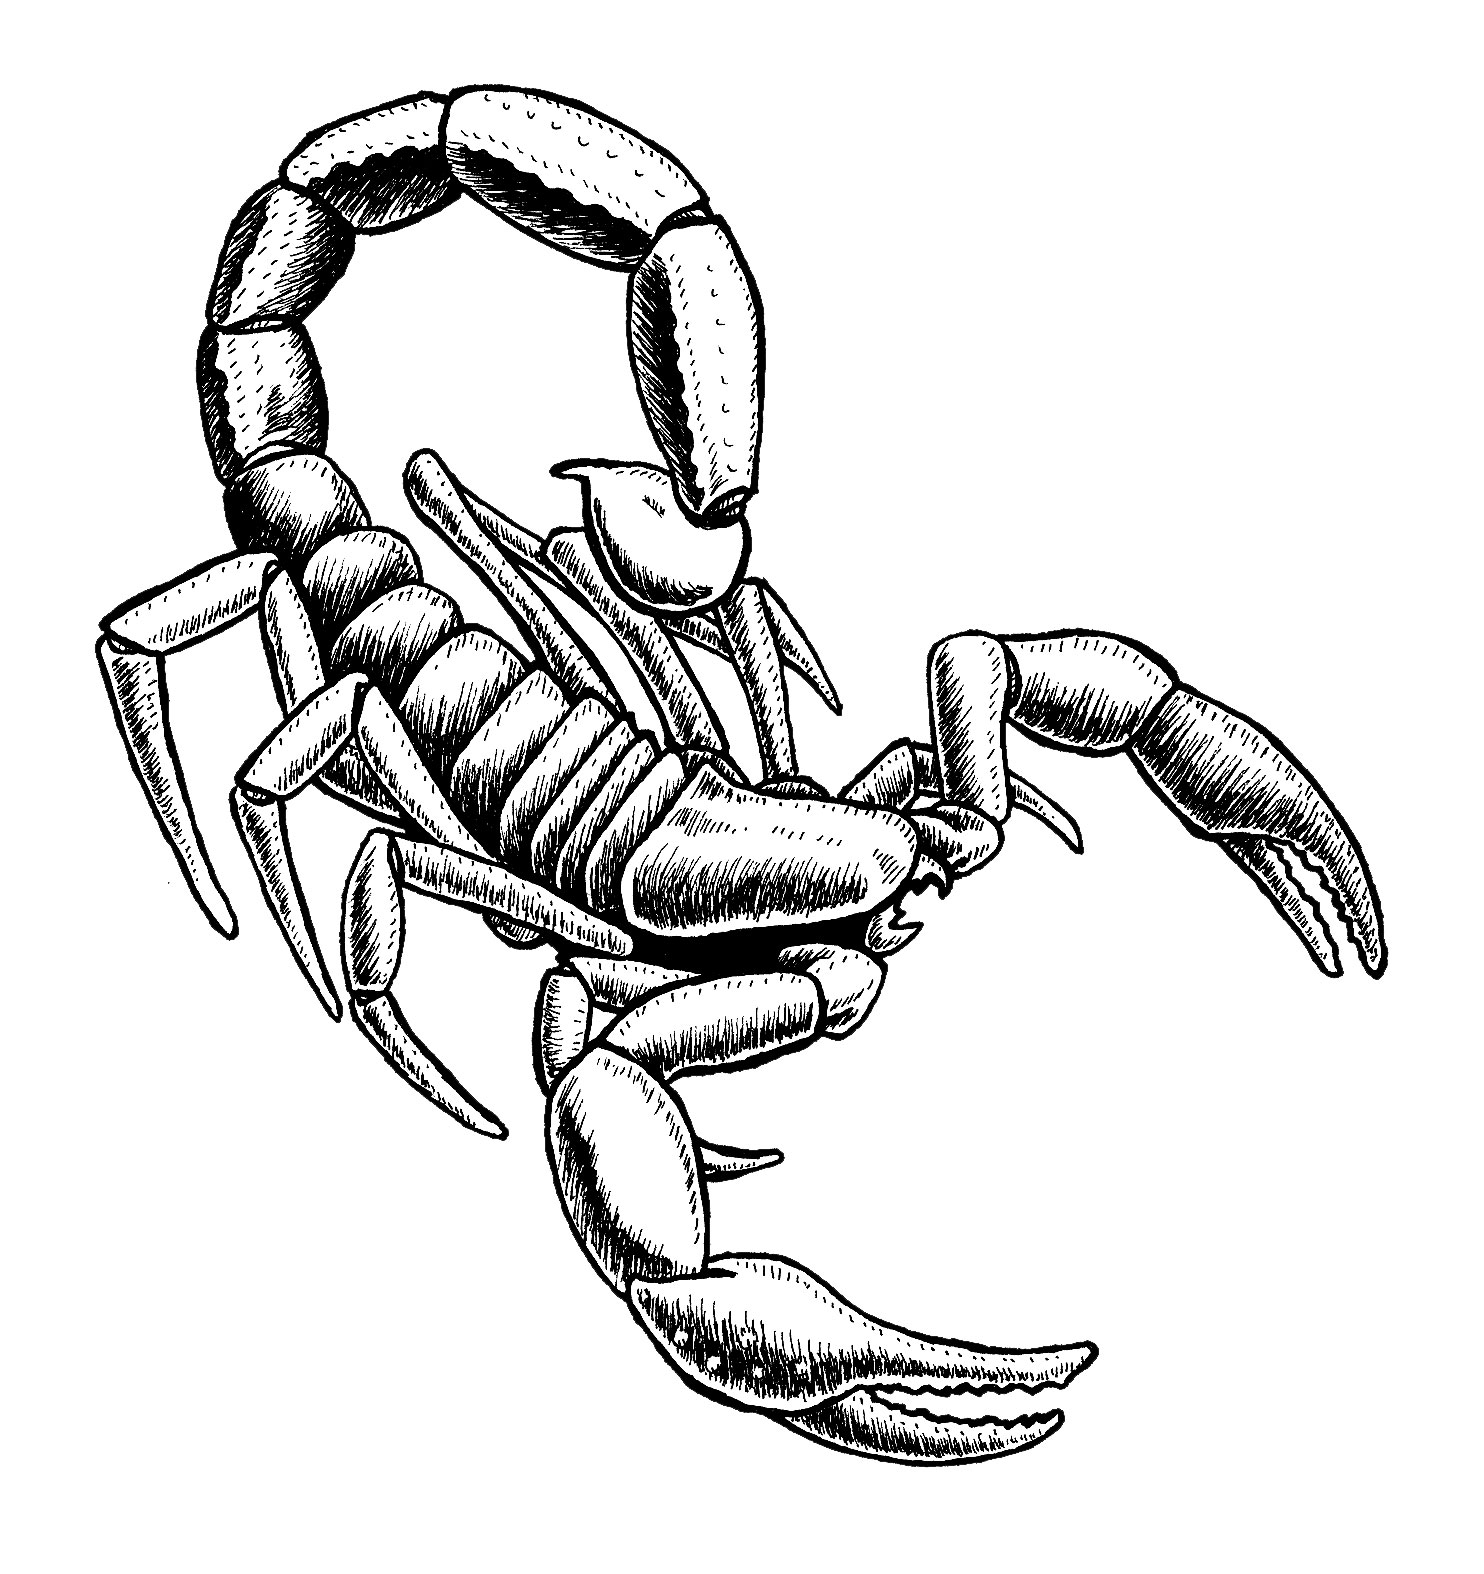 Easy Scorpion Drawing at GetDrawings.com | Free for personal use ...